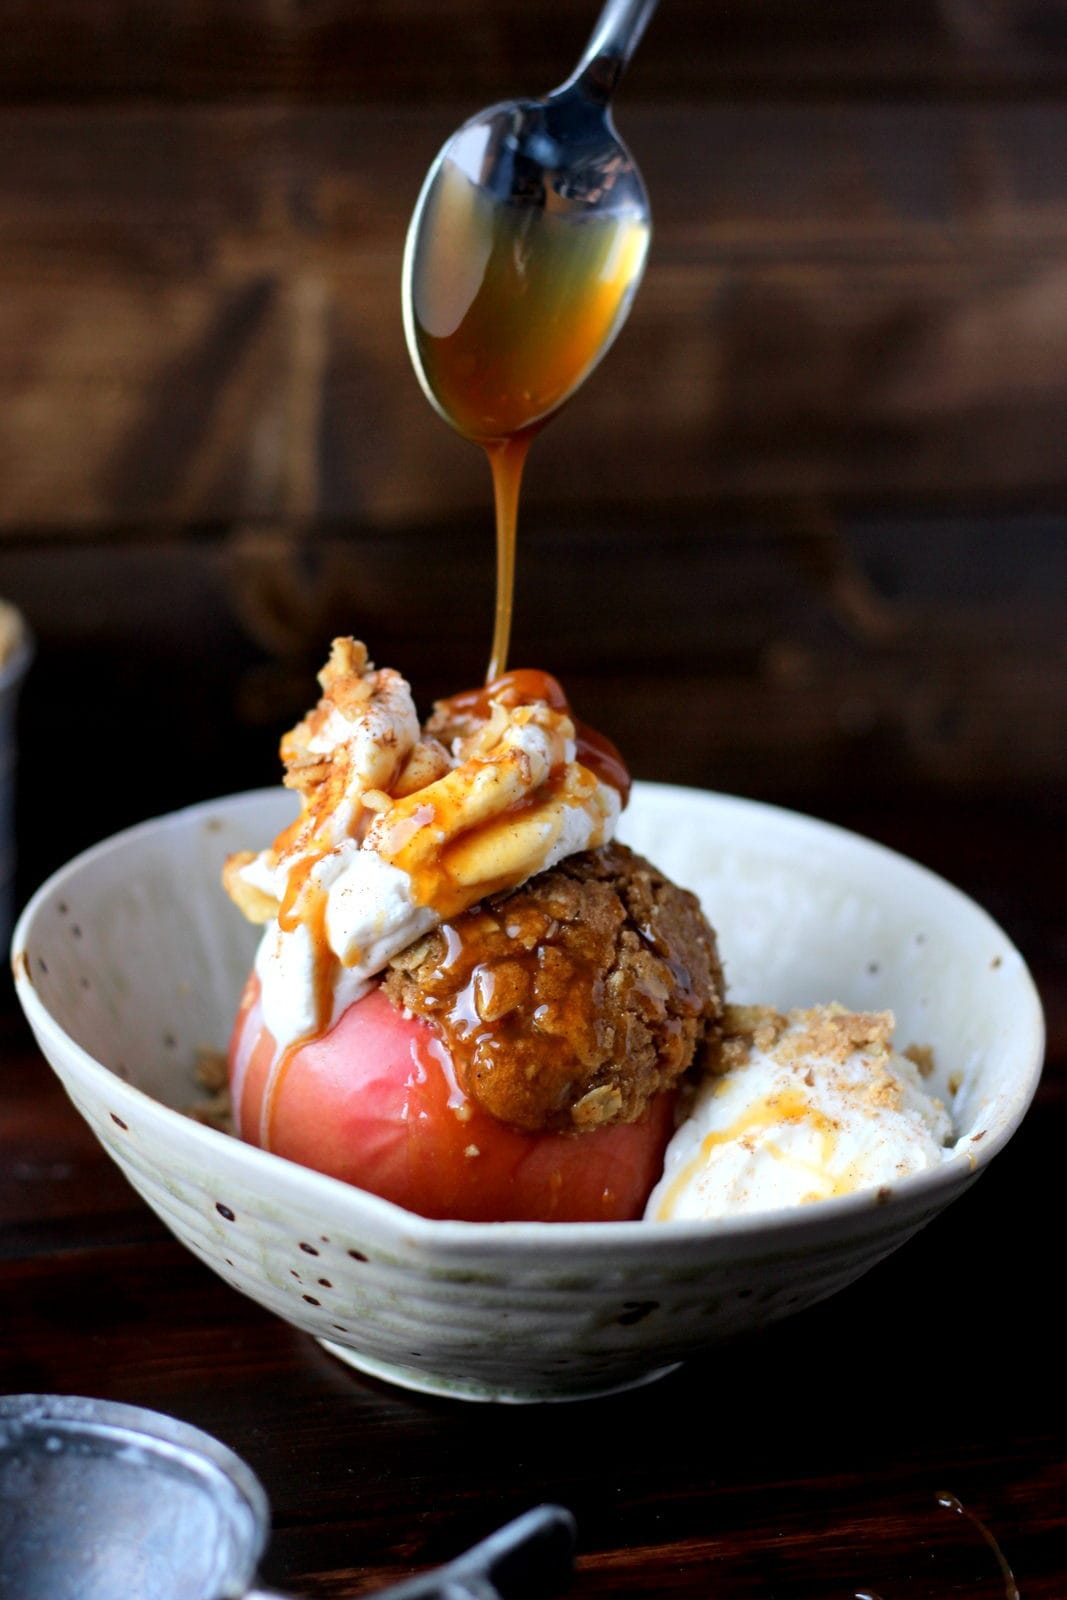 Stuffed Apples + Cardamom Whipped Cream and Vanilla Bean Ice Cream topped with Walnuts and Caramel Sauce. The perfect dessert for fall! Includes instructions on how to make homemade whipped cream! thewoodenskillet.com #foodphotography #foodstyling #apples